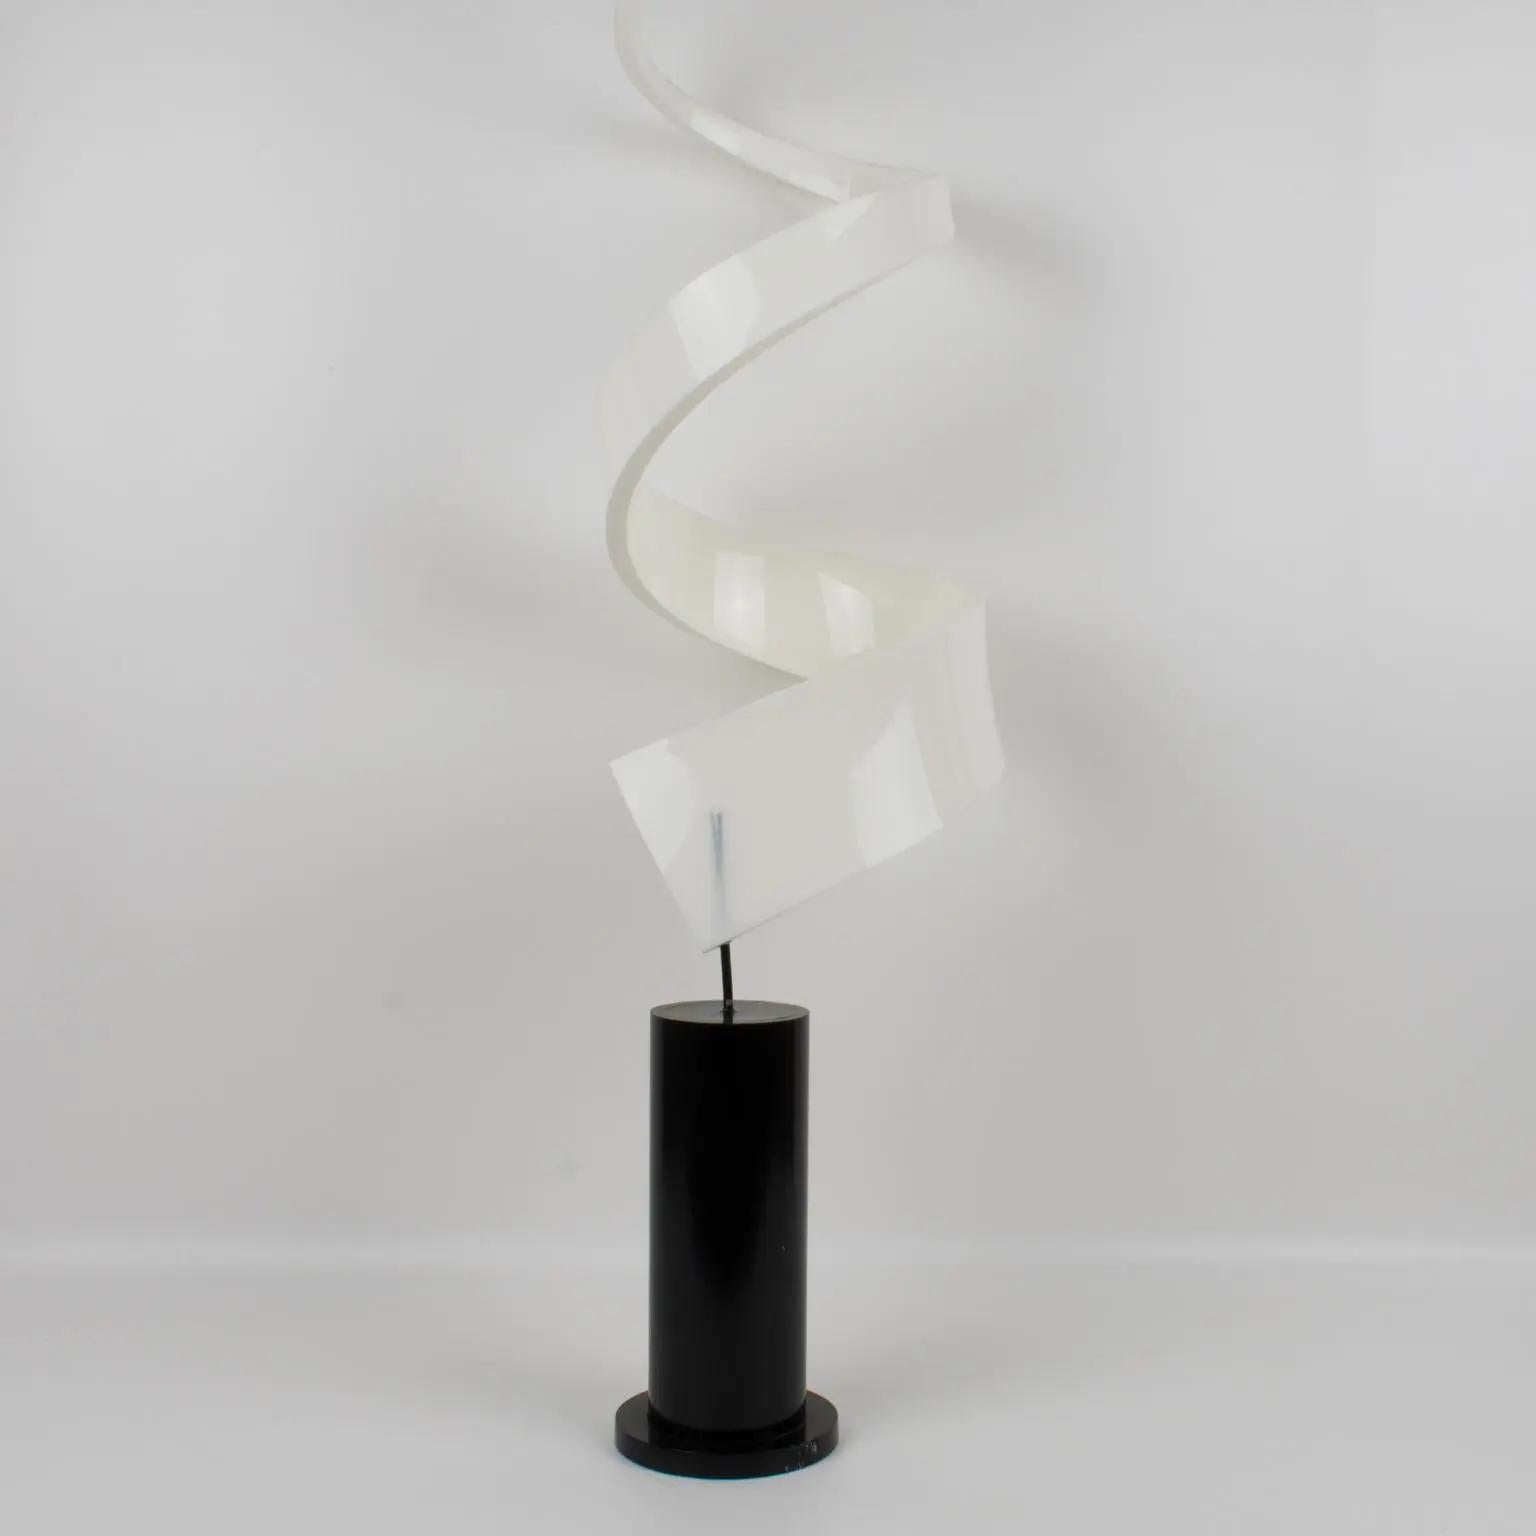 Mid-Century Modern Abstract White Lucite Swirl Sculpture In Excellent Condition For Sale In Atlanta, GA